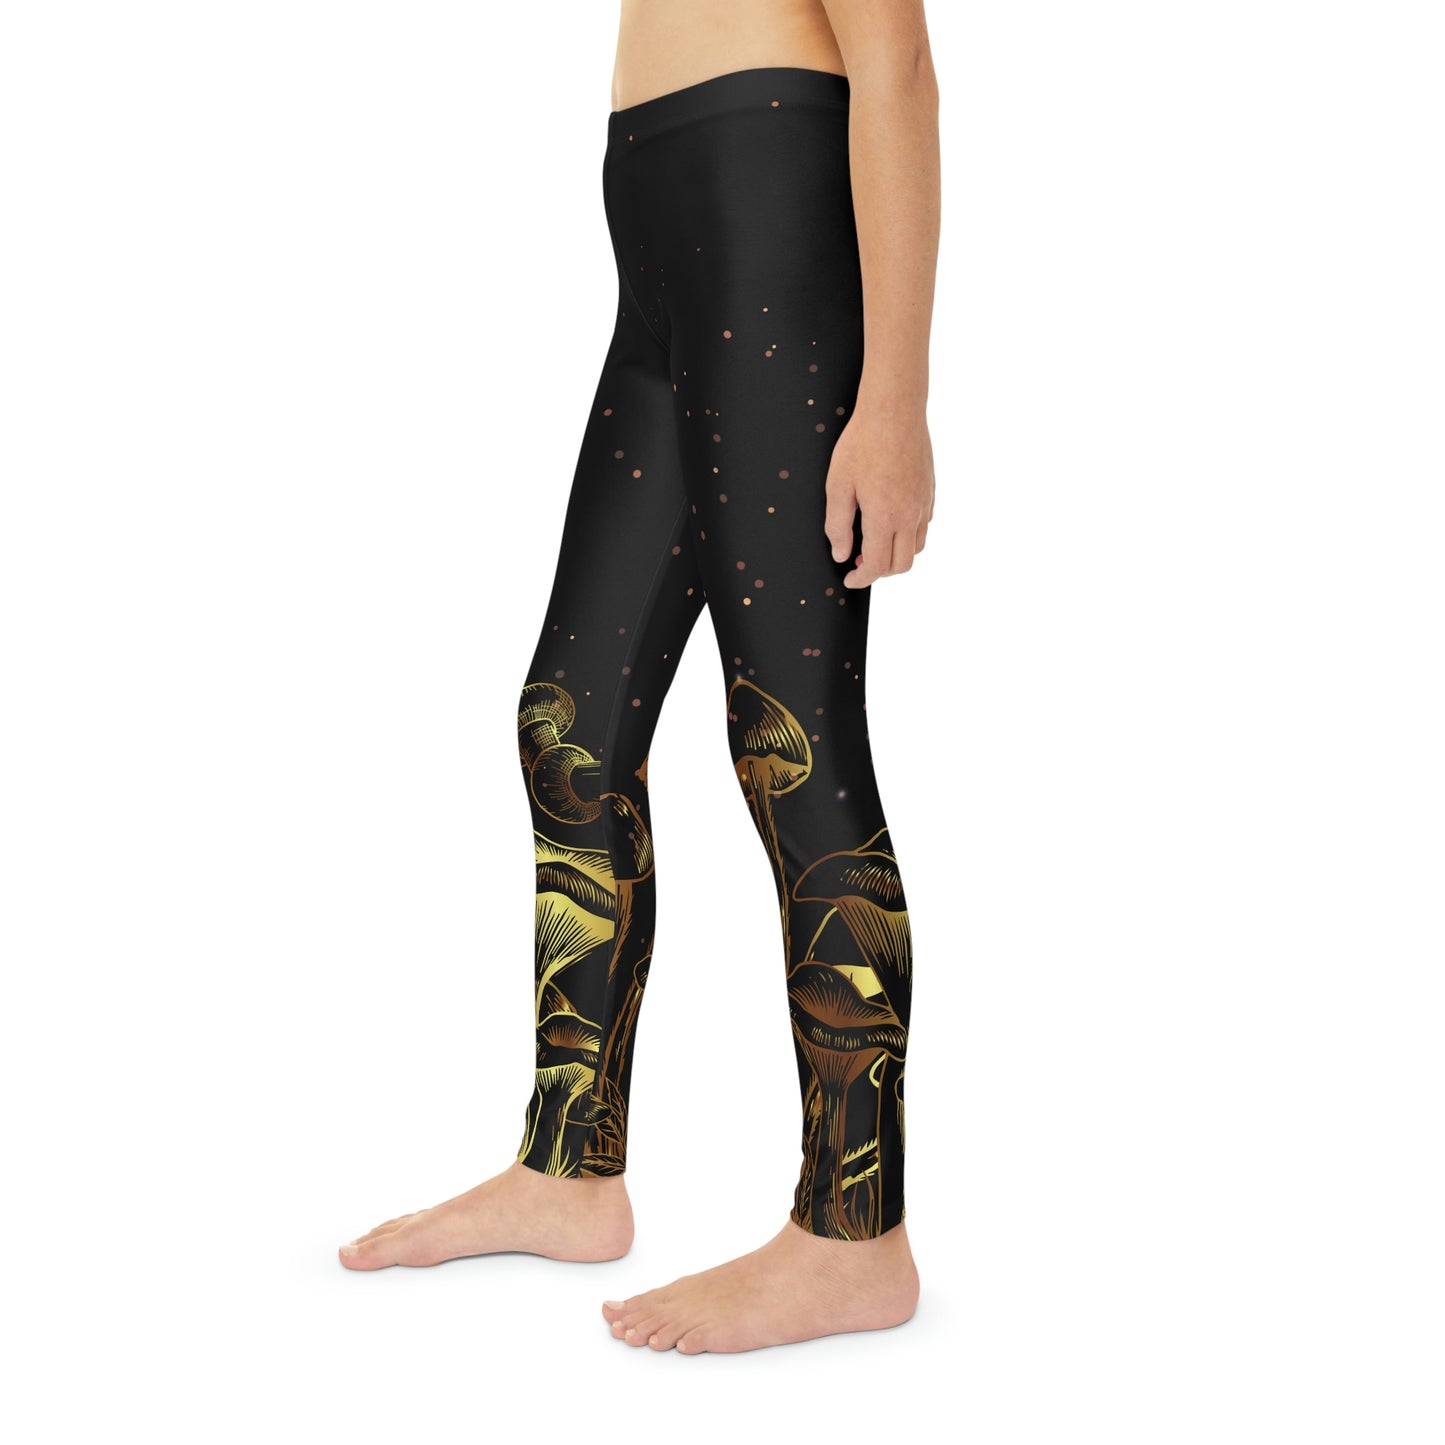 Magic Mushrooms cottagecore, Psychedelic Youth Leggings, One of a Kind - Kids Unique Workout Activewear tights , Daughter, Niece Christmas Gift